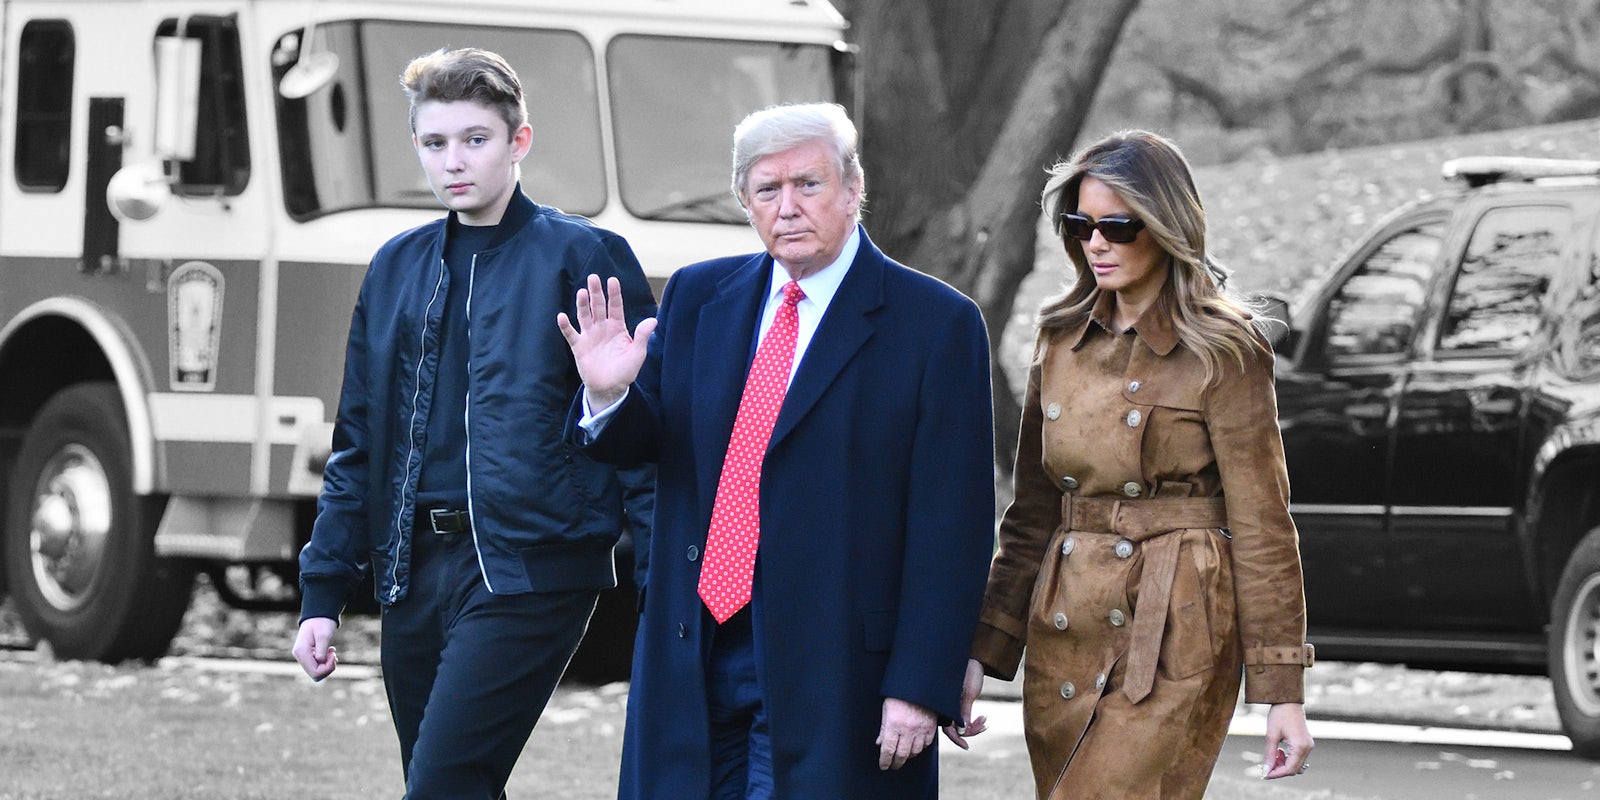 Donald Trump waves as he walks with First Lady Melania Trump and their son Barron